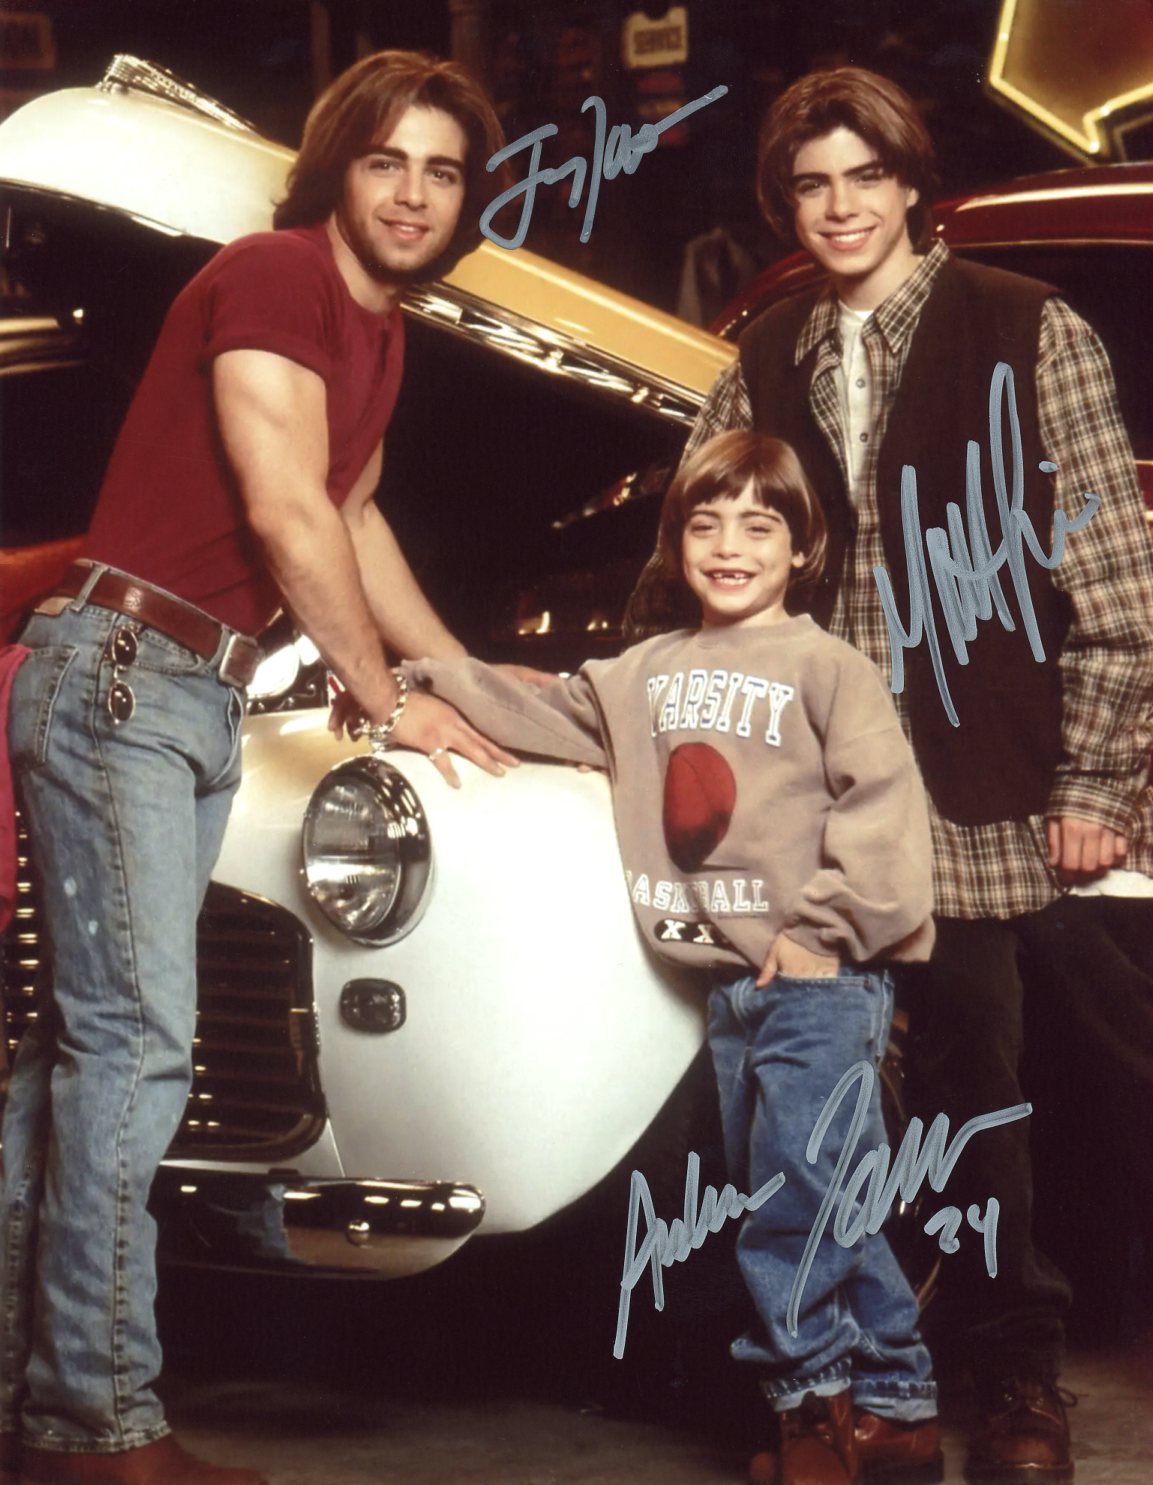 Brotherly Love 8x10 Photo Cast x3 Signed Lawrence Brothers JSA Certified Autograph